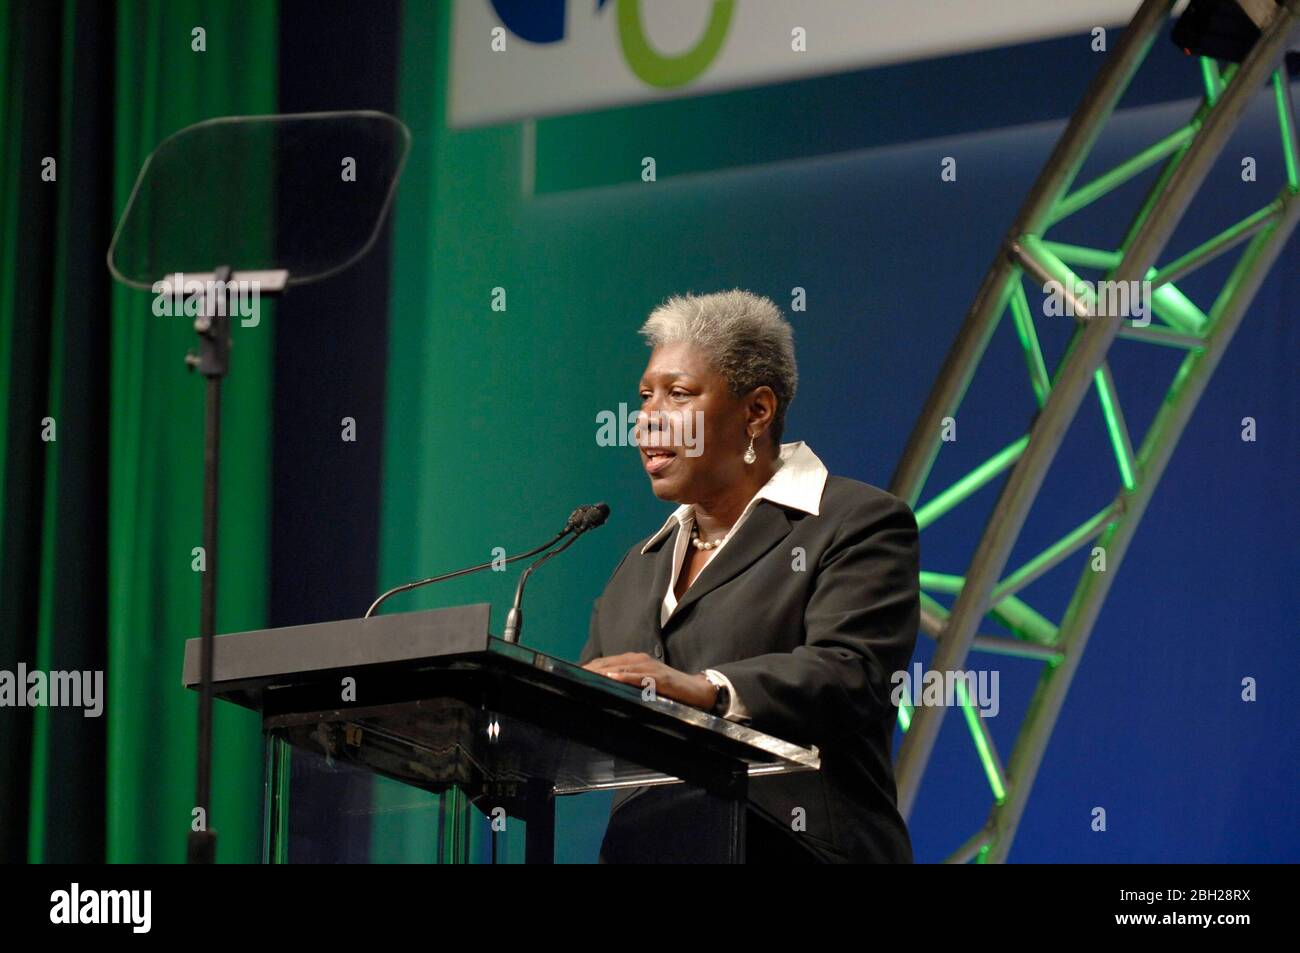 Houston, Texas USA, April 21, 2007: Motivational speaker Dr. Delorese Ambrose addresses businesspeople at a trade association convention about effective communication in personal and professional life . ©Bob Daemmrich Stock Photo